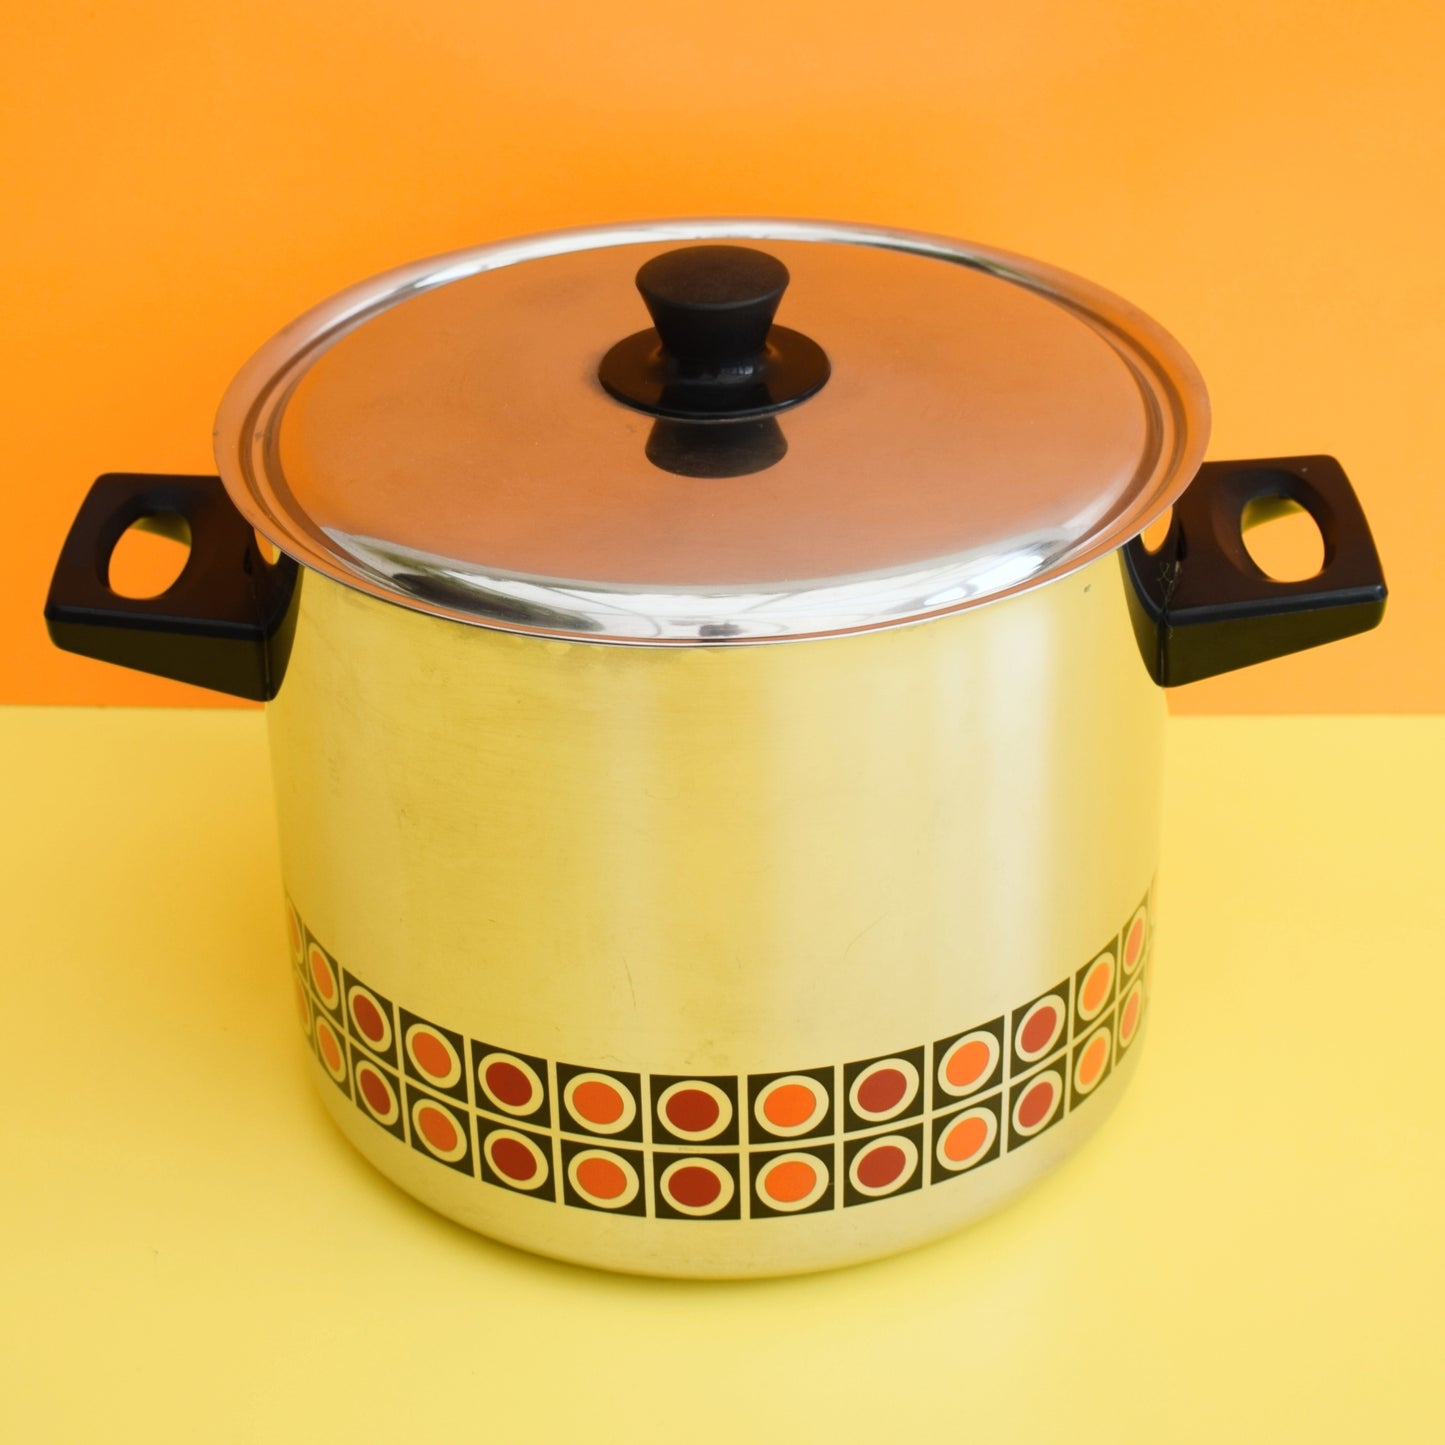 Vintage 1970s Large Cooking Pot - Swiss Made